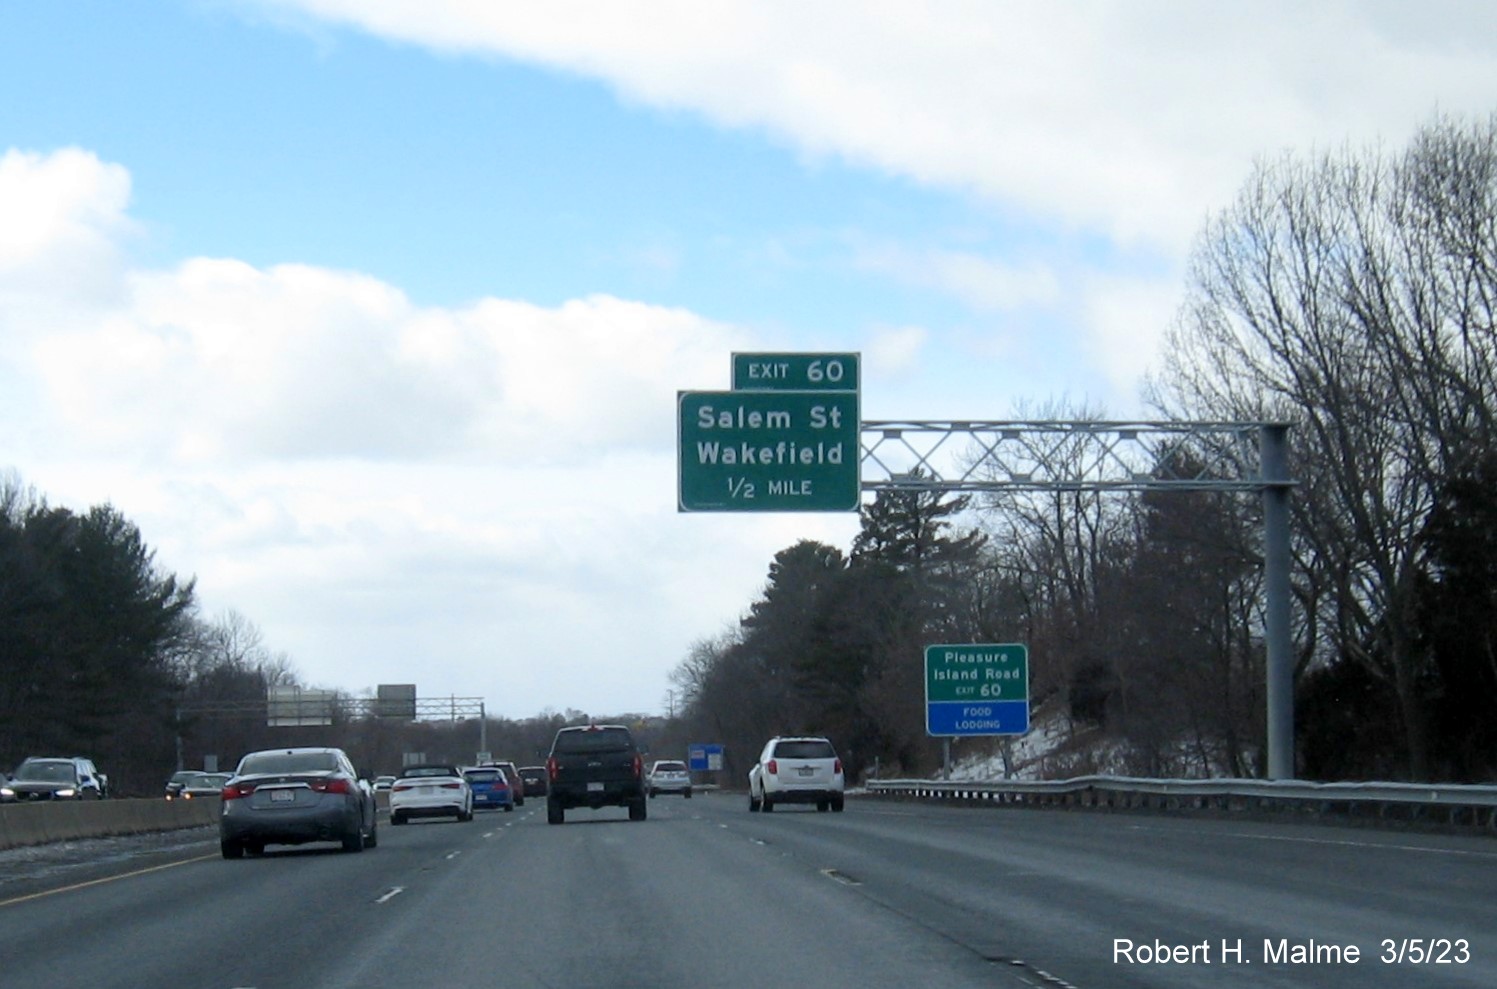 Image of recently placed 1/2 mile advance overhead sign for Salem Street exit on I-95/MA 128 South in Wakefield, March 2023